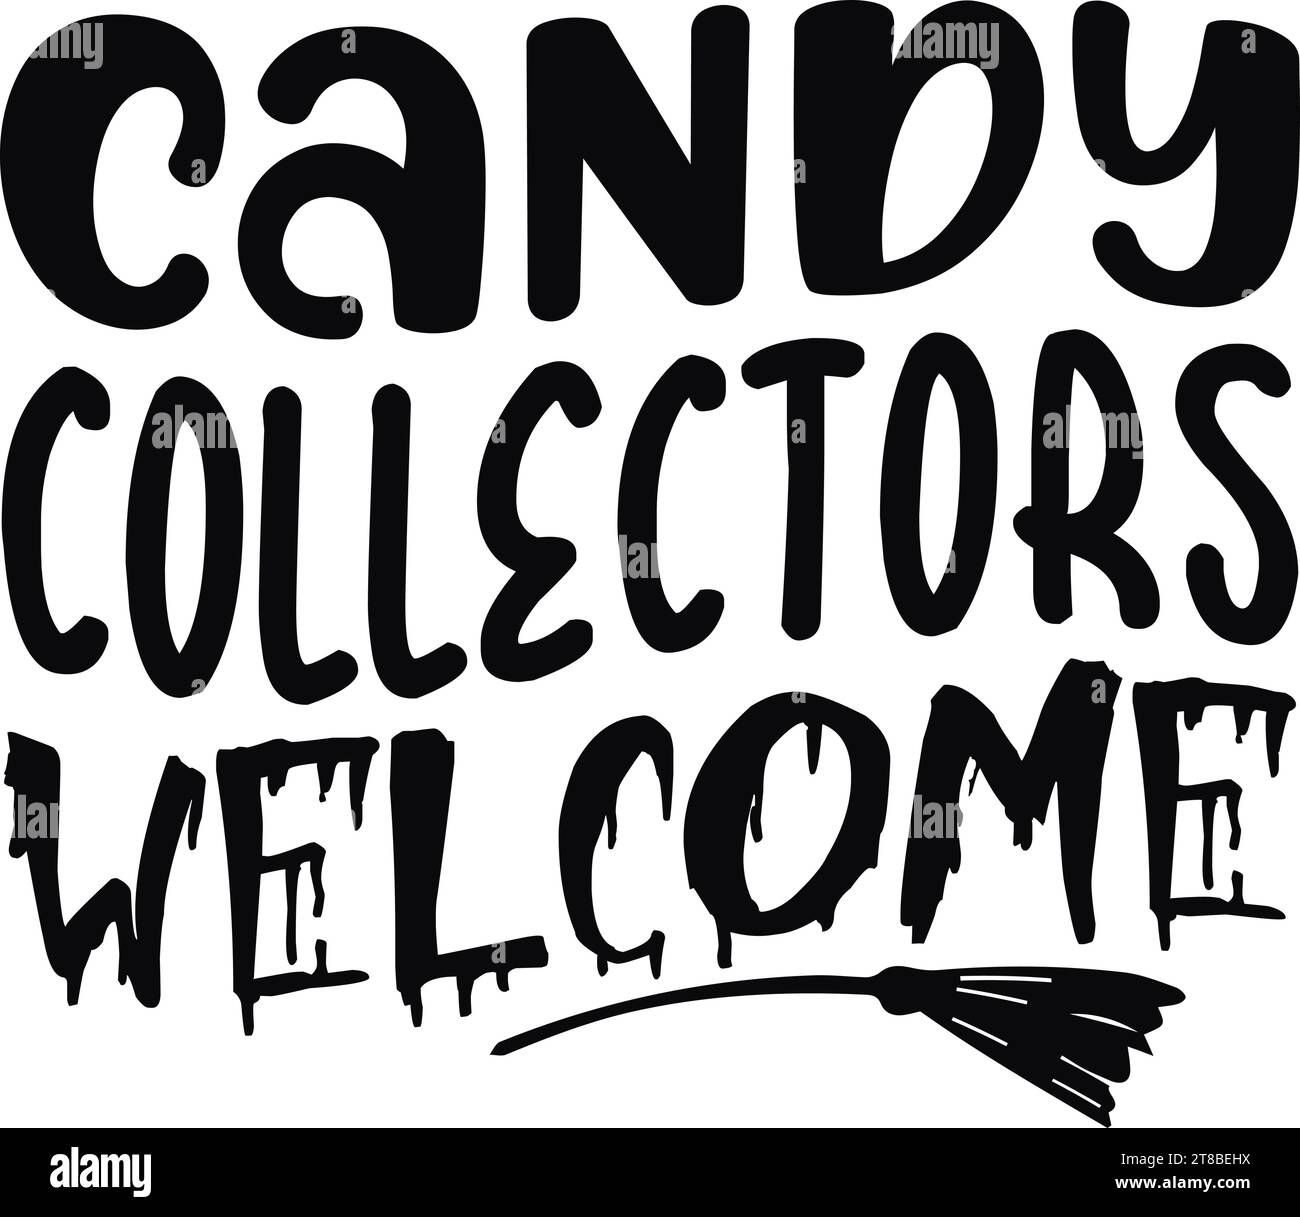 Candy Collectors Welcome Stock Vector